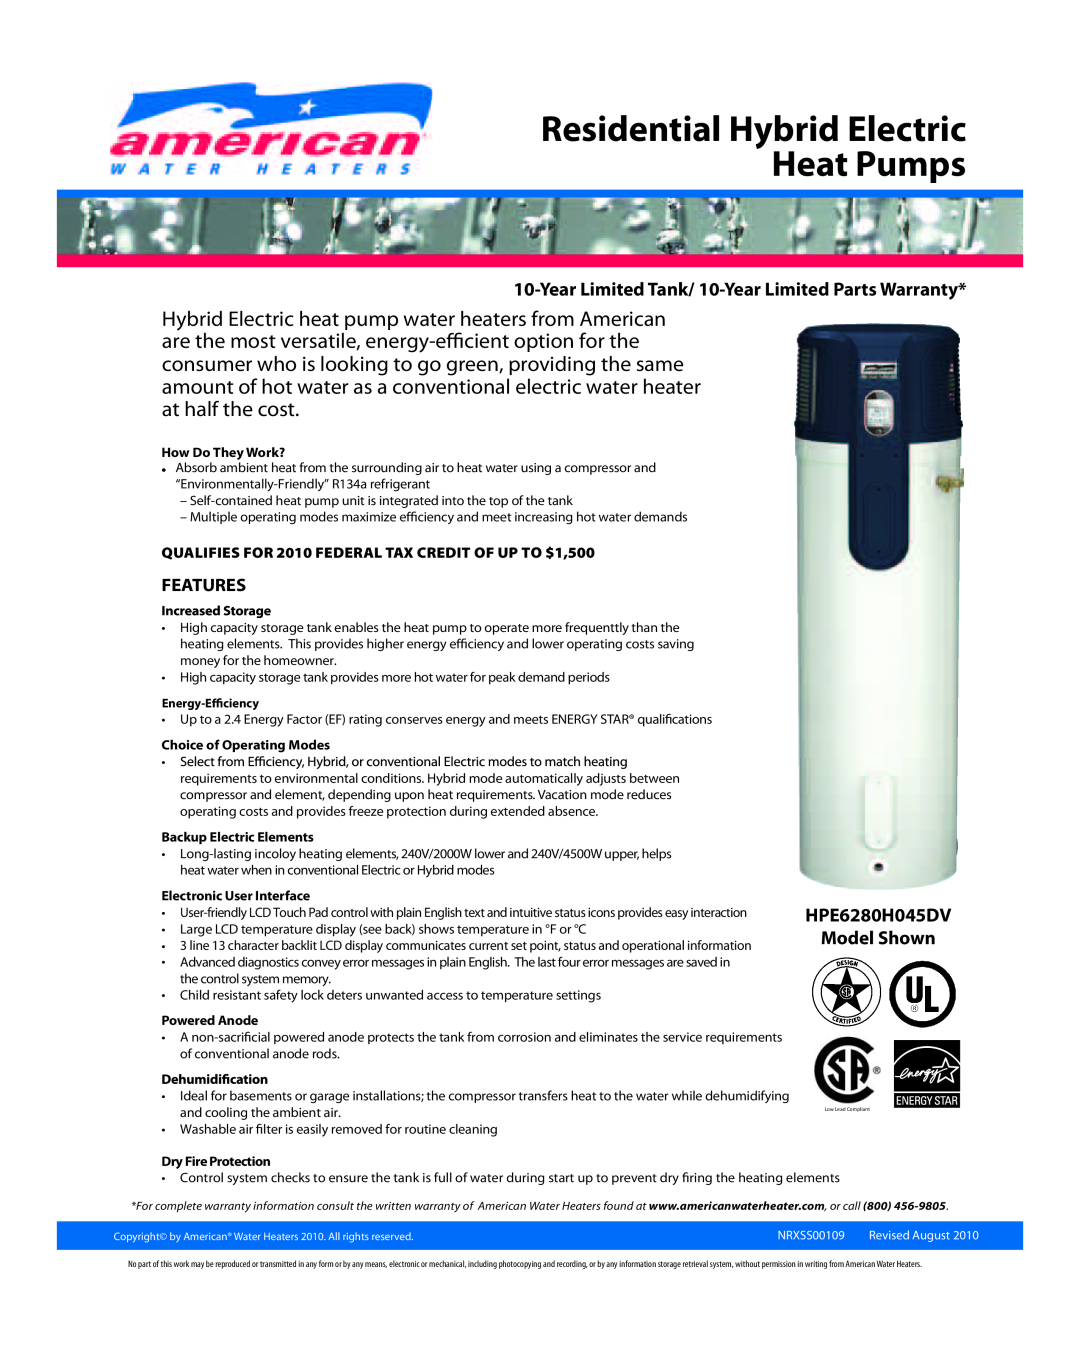 American Water Heater HPE6280H045DV warranty QUALIFIES FOR 2010 FEDERAL TAX CREDIT OF UP TO $1,500, Features, NRXSS00109 